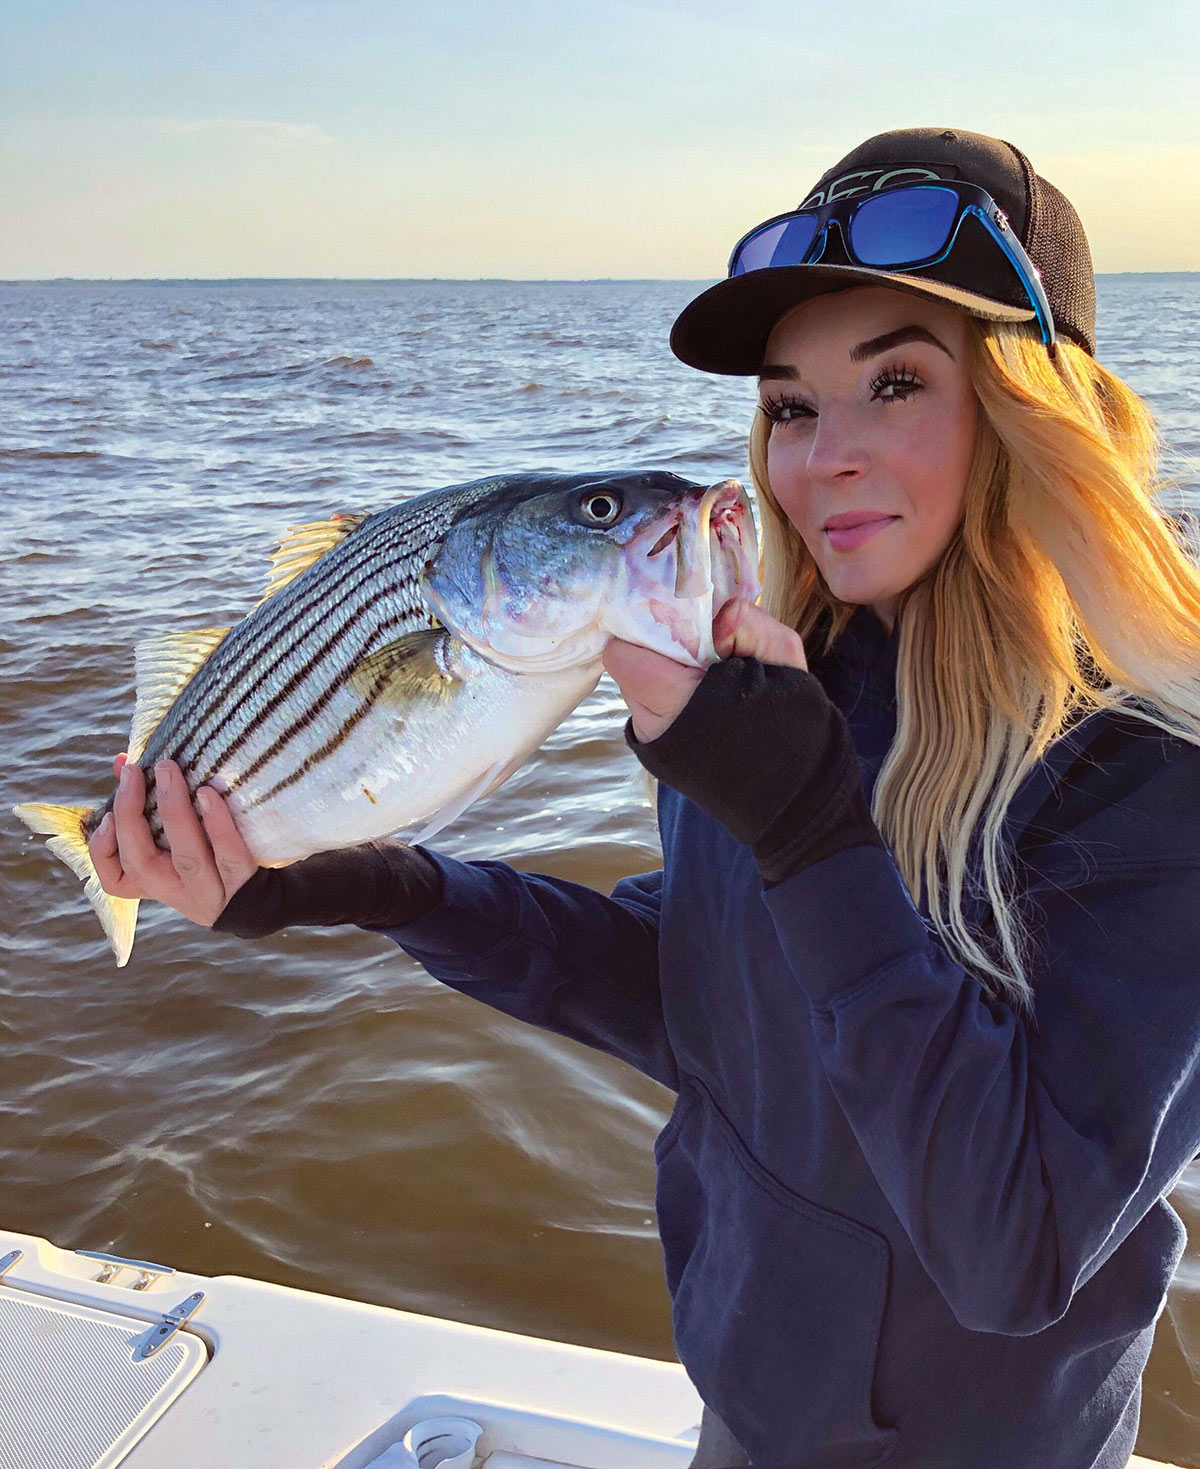 Blond woman shows off striped bass